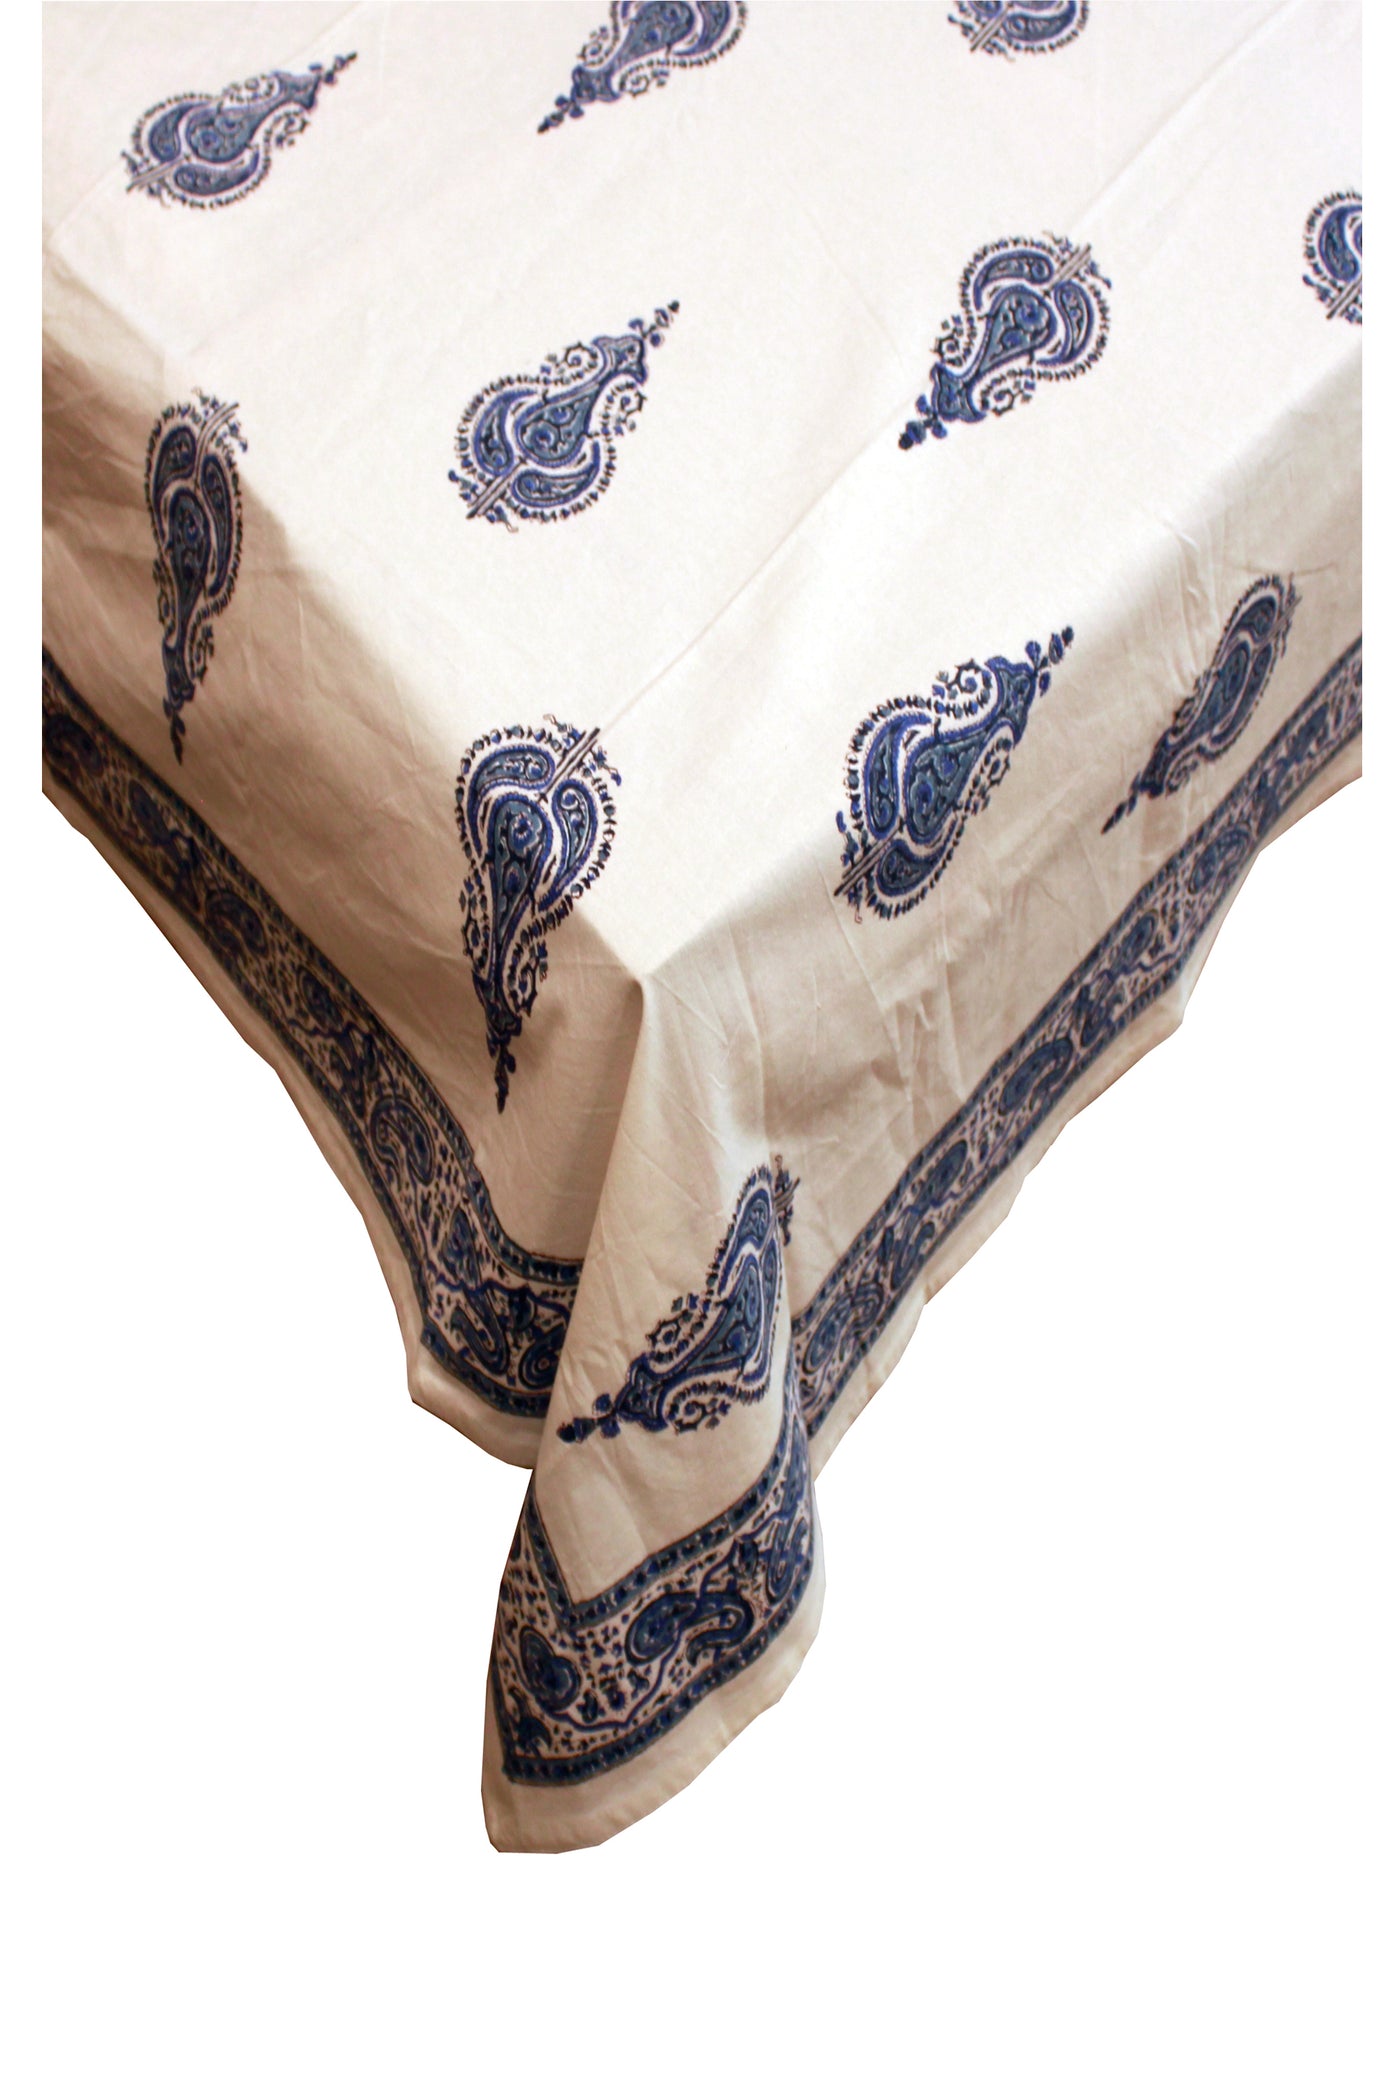 Square Table Cover Paisley Buta Print in Blue